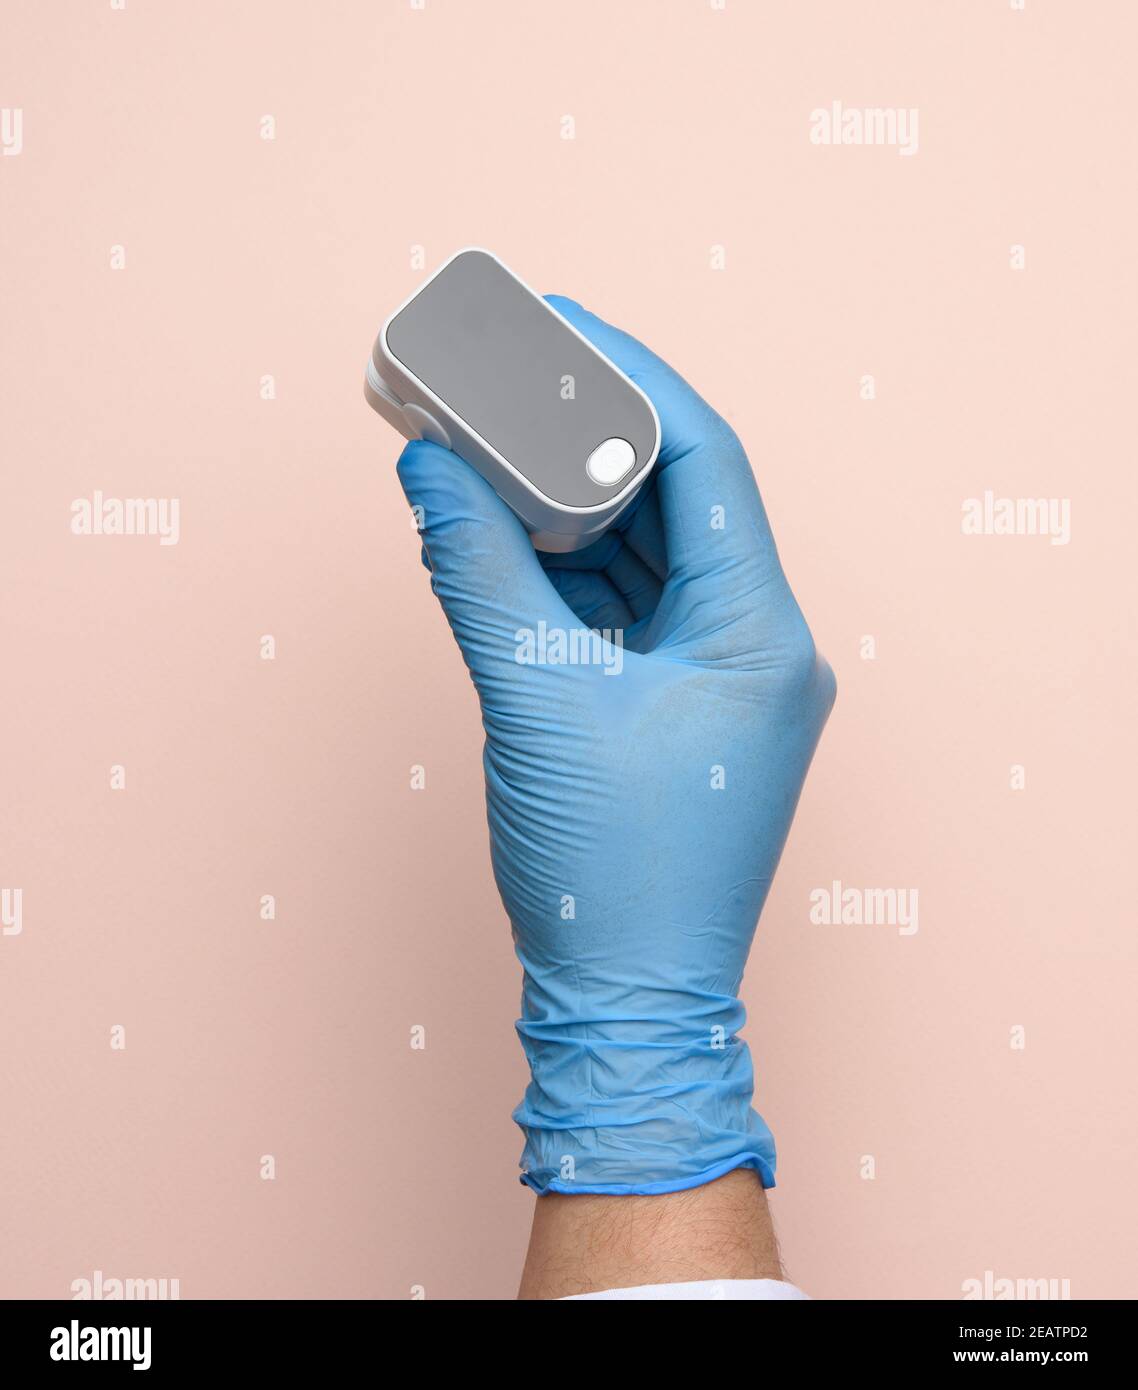 electronic pulse oximeter in the hands of a doctor, wearing blue latex gloves Stock Photo